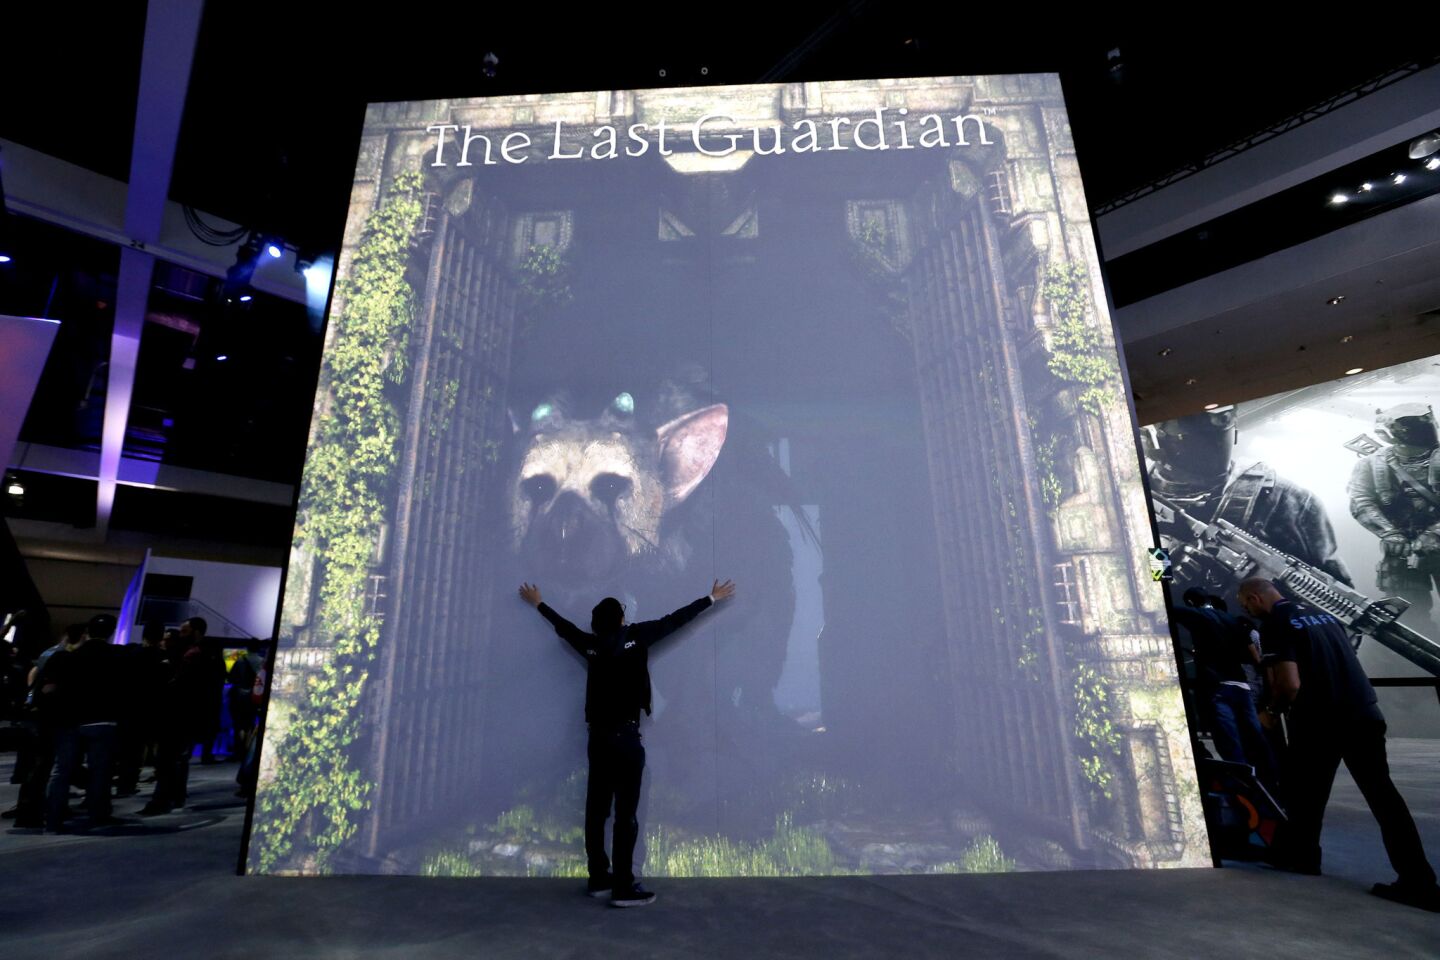 Jesse Diep gives "Trico," a beast from "The Last Guardian" Sony PlayStation 4 exclusive game to be released Oct. 25, an interactive hug at E3. People are able to feed and pet the beast through a large projection and sensor system.